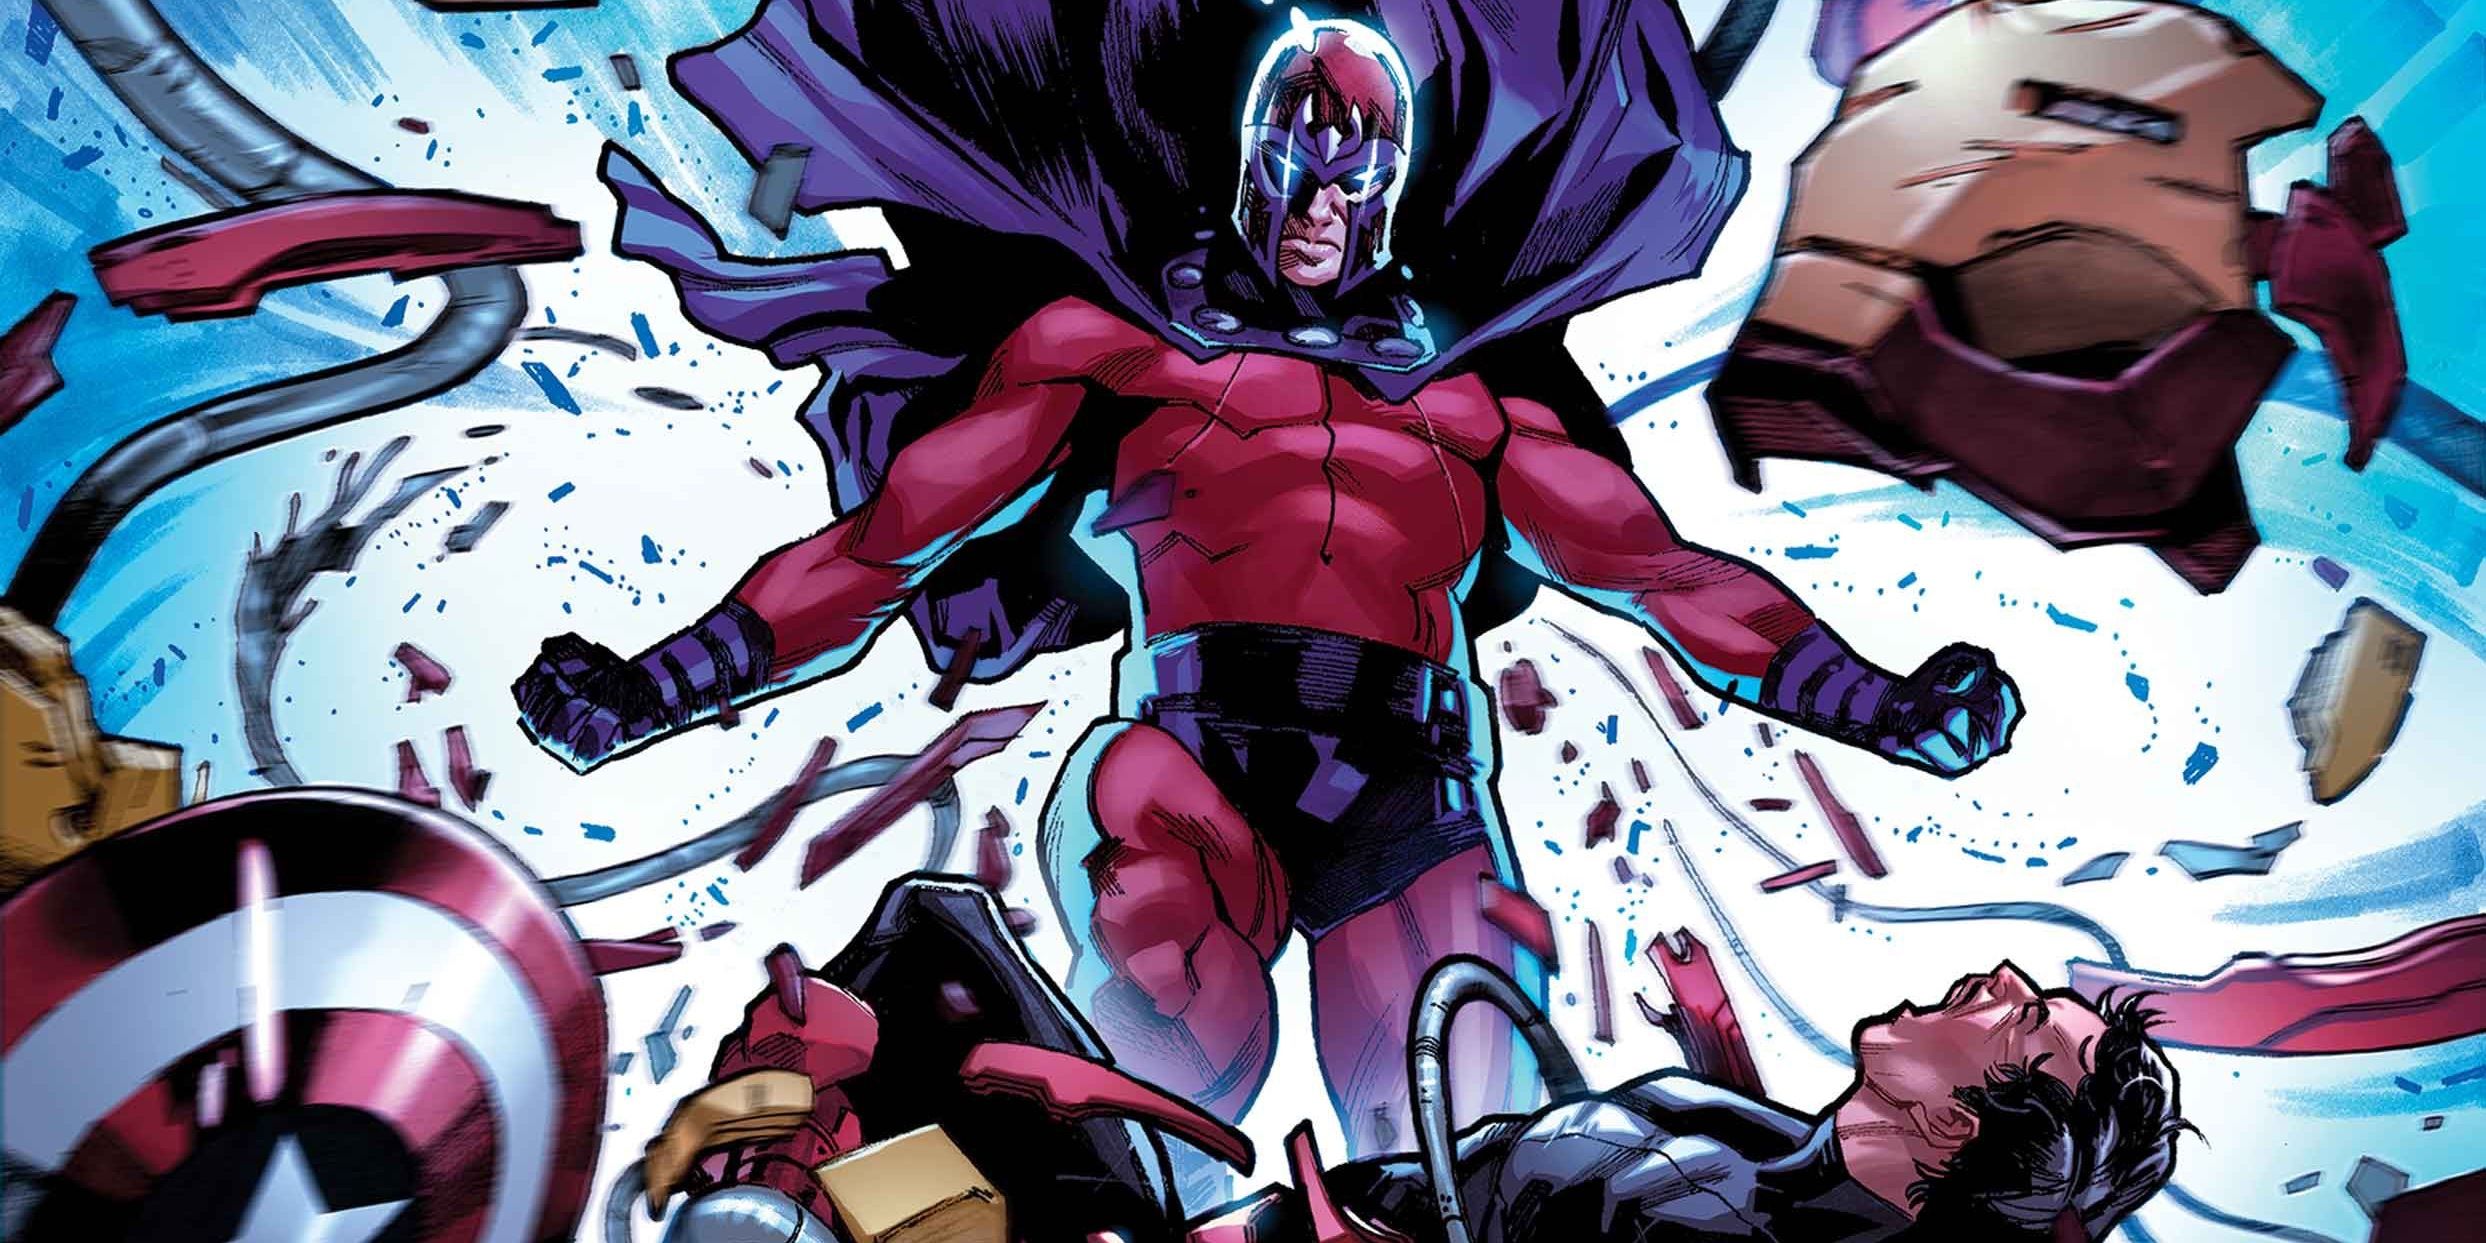 Magneto hovers as he uses his powers in a Marvel comic.